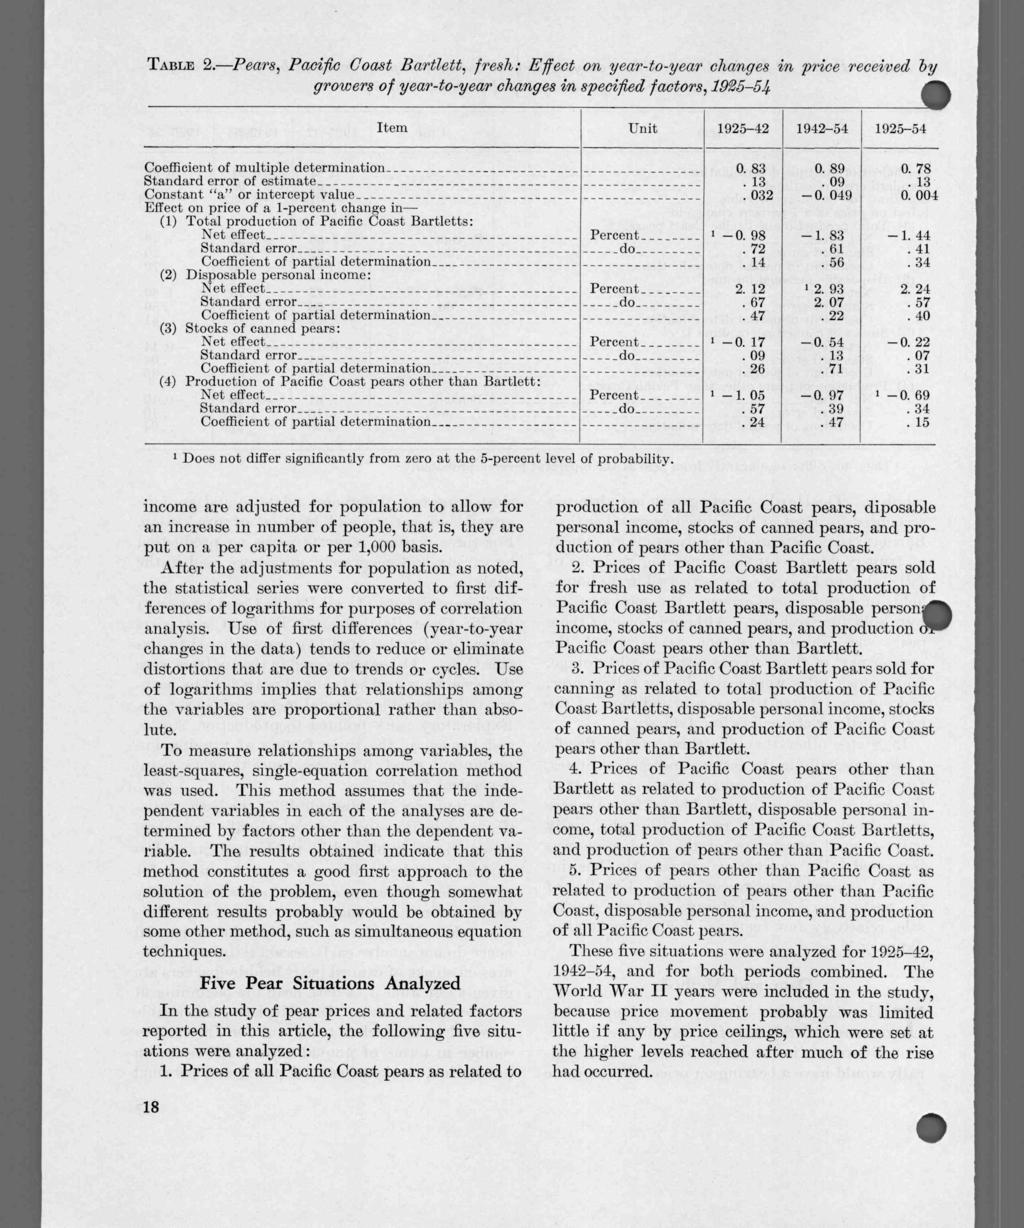 TABLE 2. Pears, Pacific Coast Bartlett, fresh: Effect on year-to-year changes in price received by growers of year-to-year changes in specified factors, 1925-54.